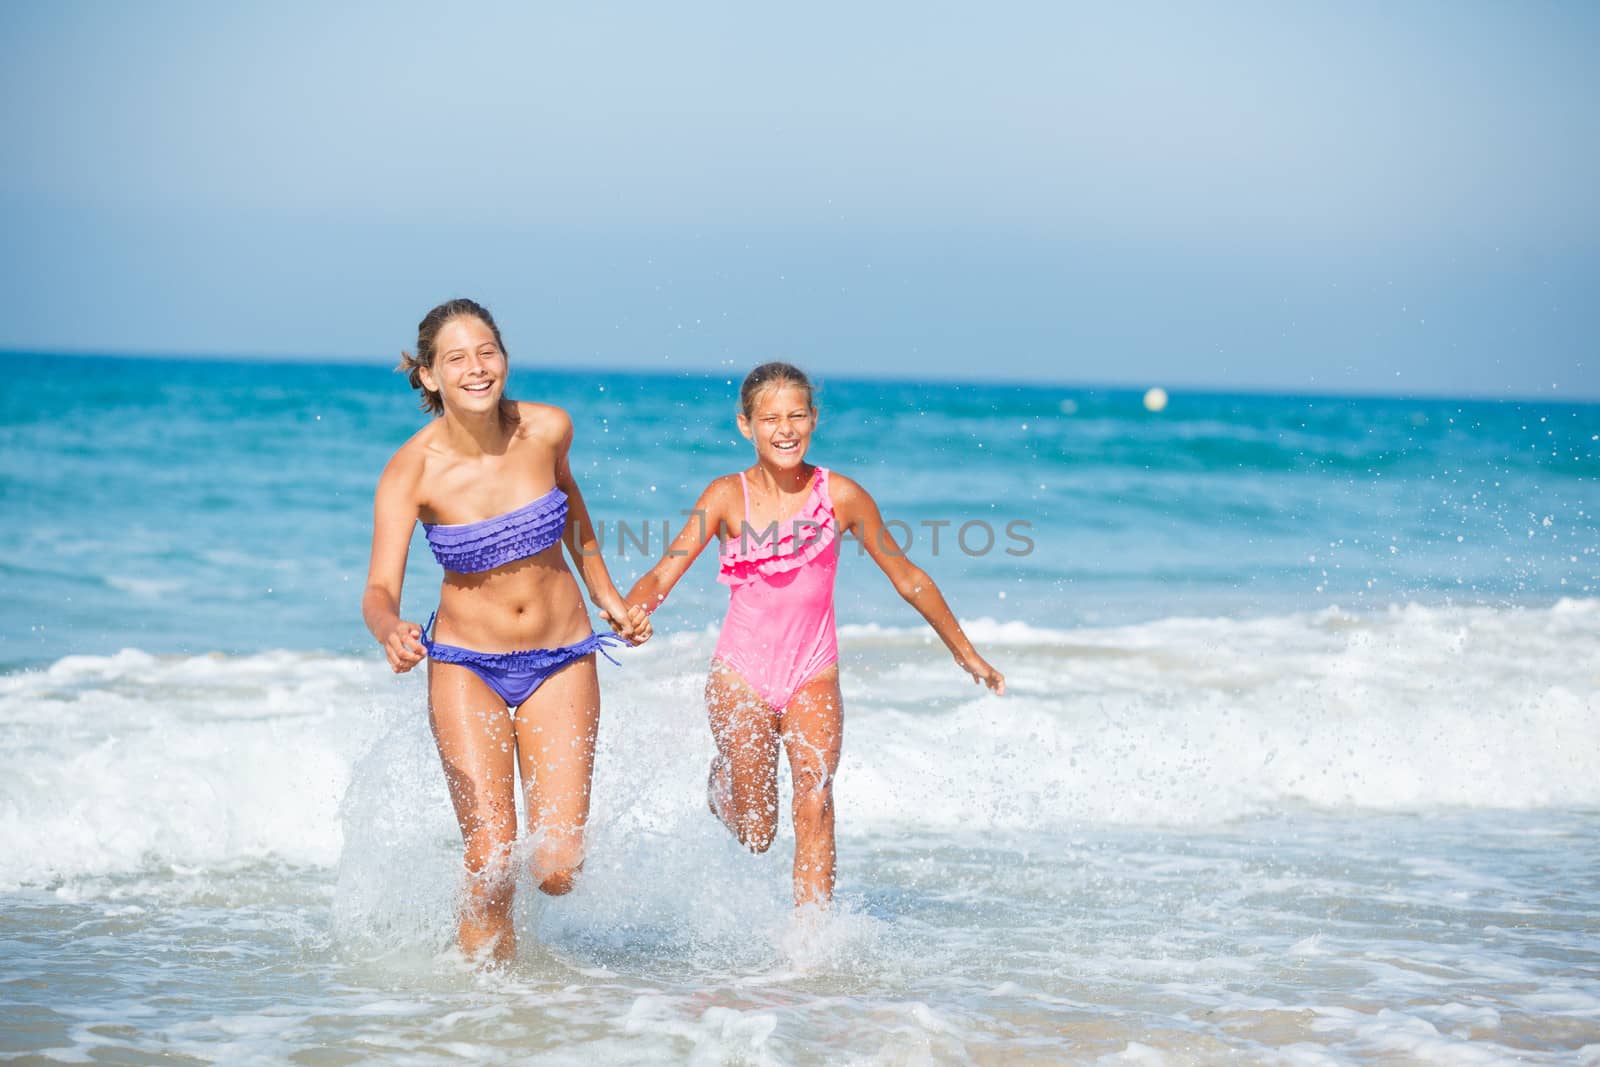 Cute girls friends running together in the beach shore on summer vacation